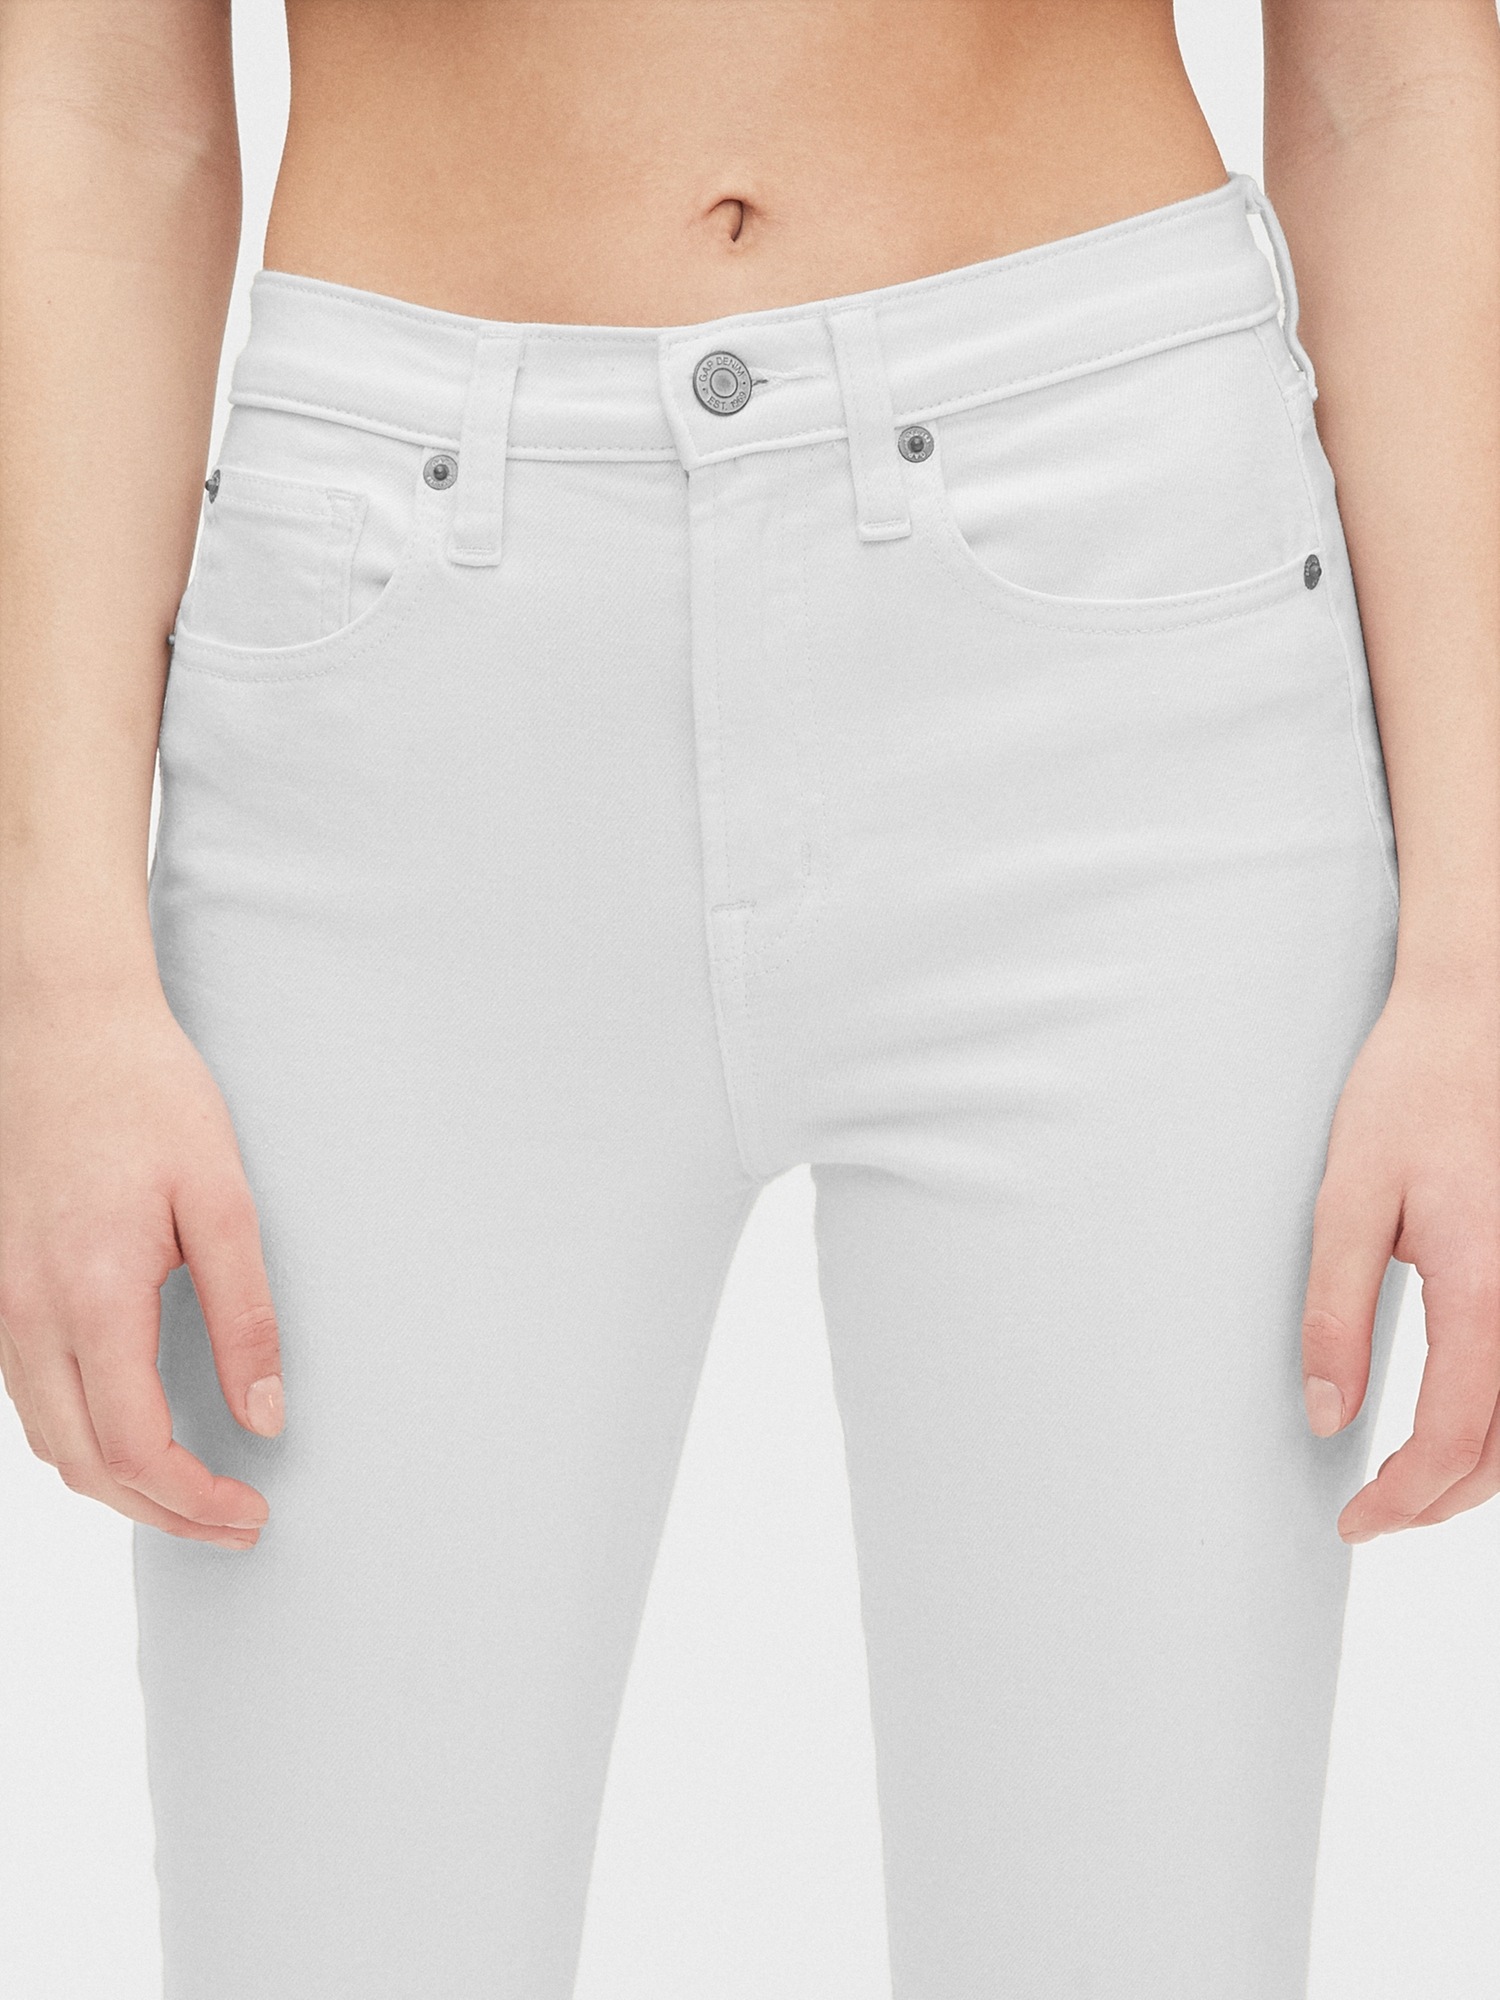 GAP 1969 AUTHENTIC BEST GIRLFRIEND  WHITE DENIM JEANS SOLD OUT FALL16 S/177647 